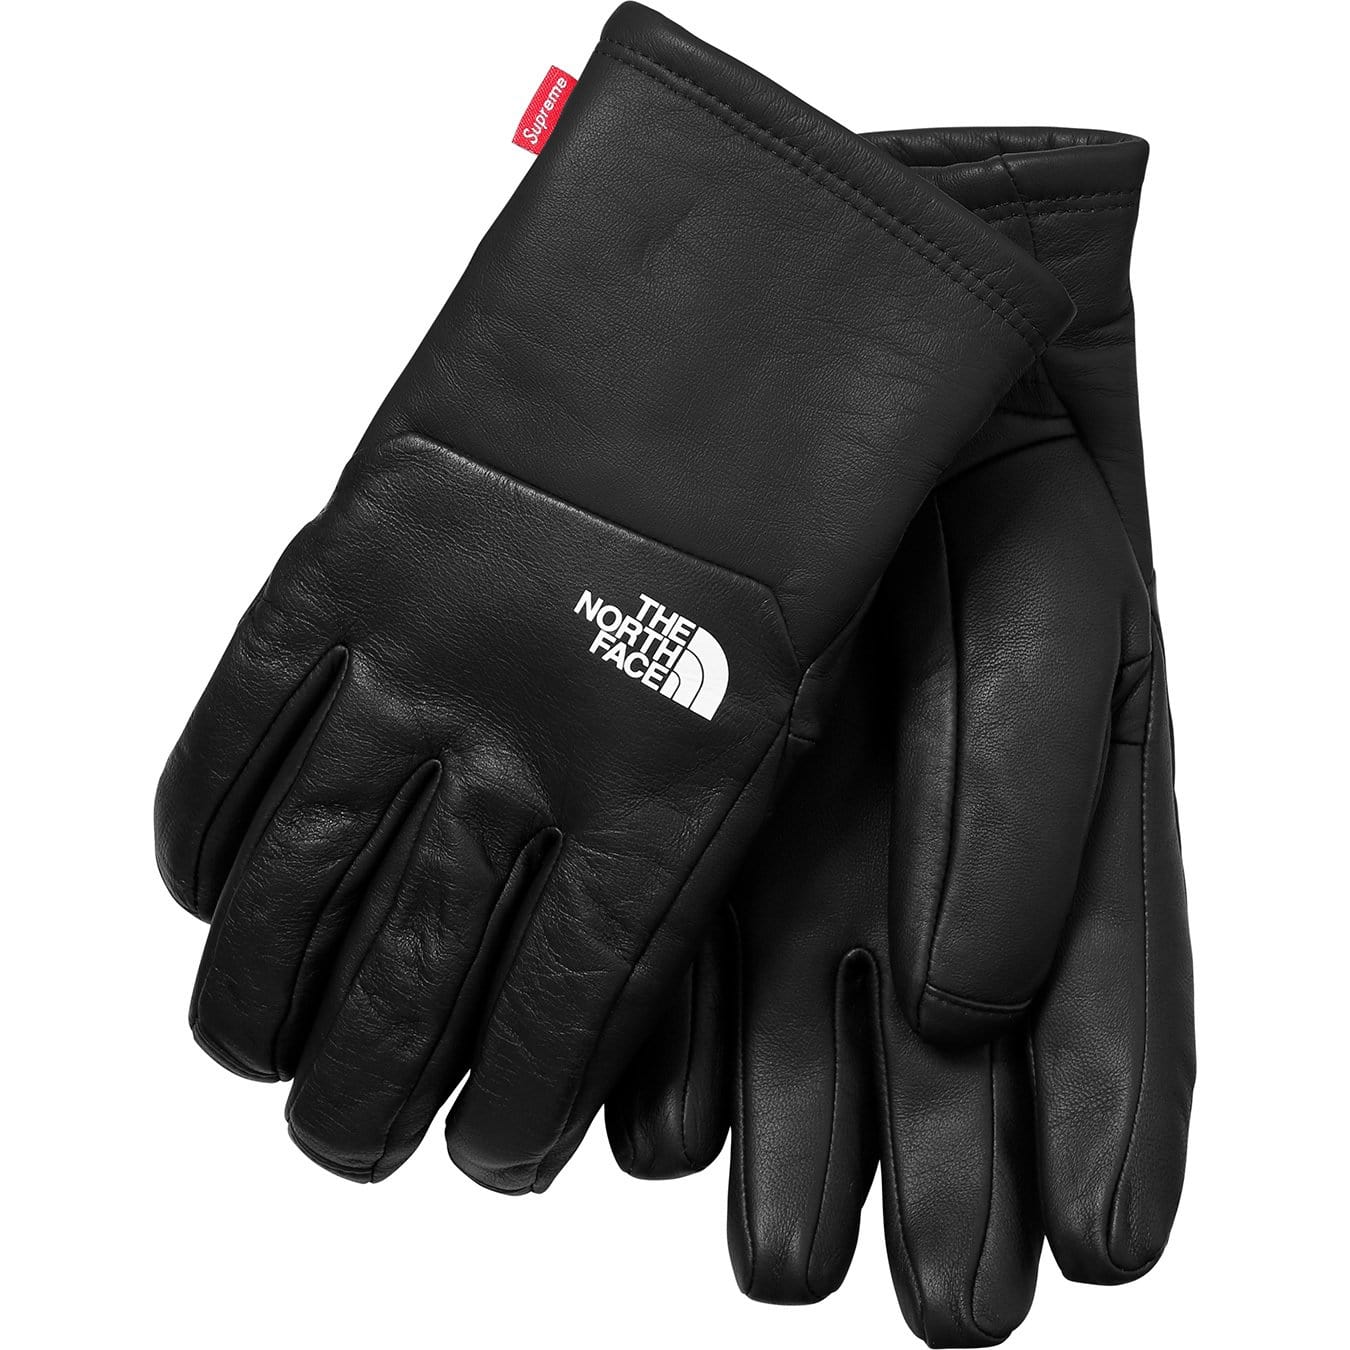 Leather gloves Louis Vuitton x Supreme Black size 8 Inches in